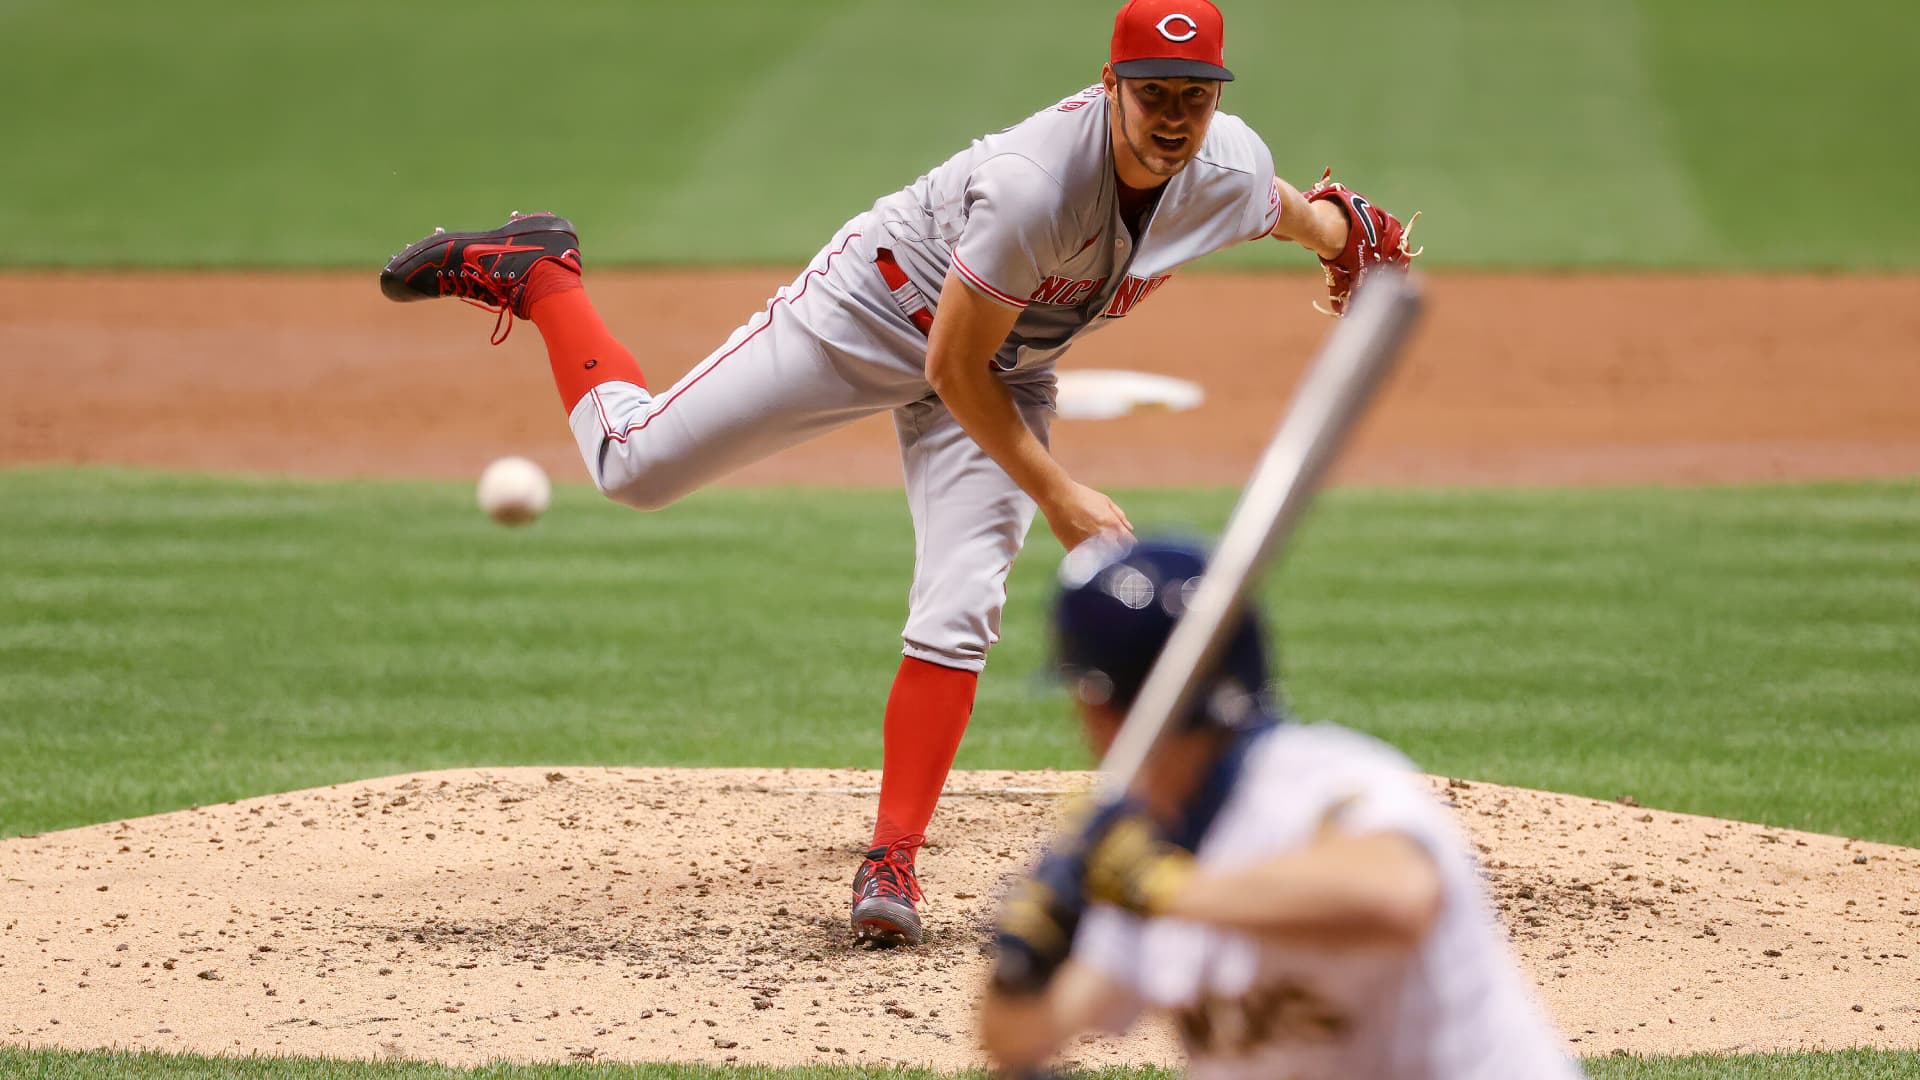 Trevor Bauer #27 of the Cincinnati Reds pitches in the third inning against the Milwaukee Brewers at Miller Park on August 07, 2020 in Milwaukee, Wisconsin.